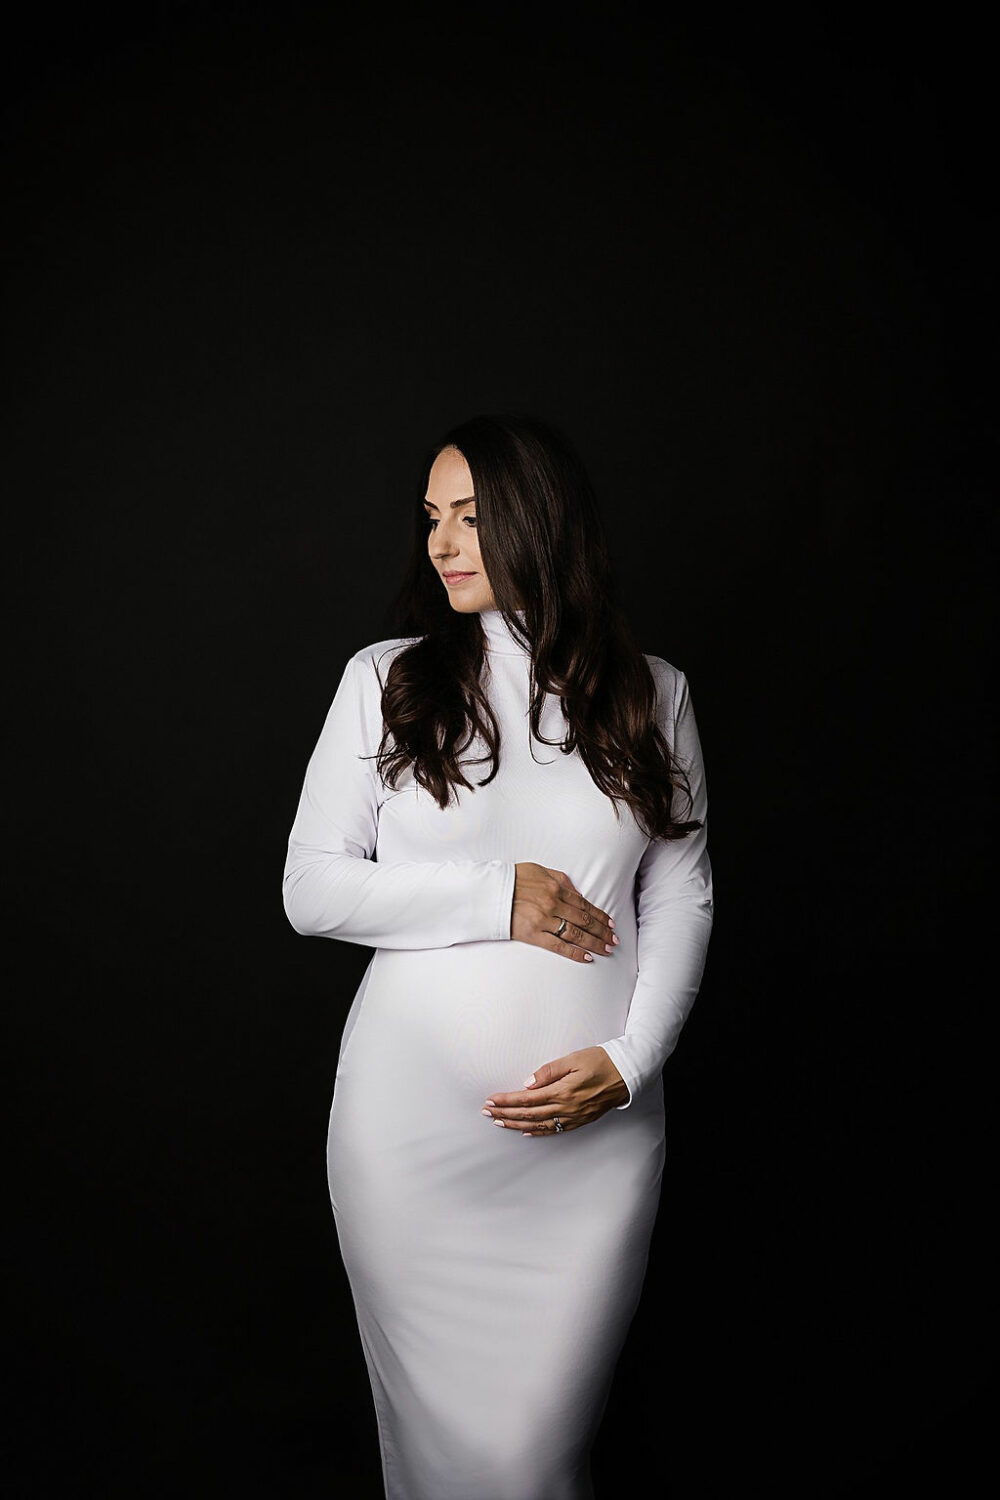 Woman holding her belly standing facing toward camera looking off to the side for her maternity photo shoot poses taken in studio for her black and white maternity session in Hamilton, New Jersey.